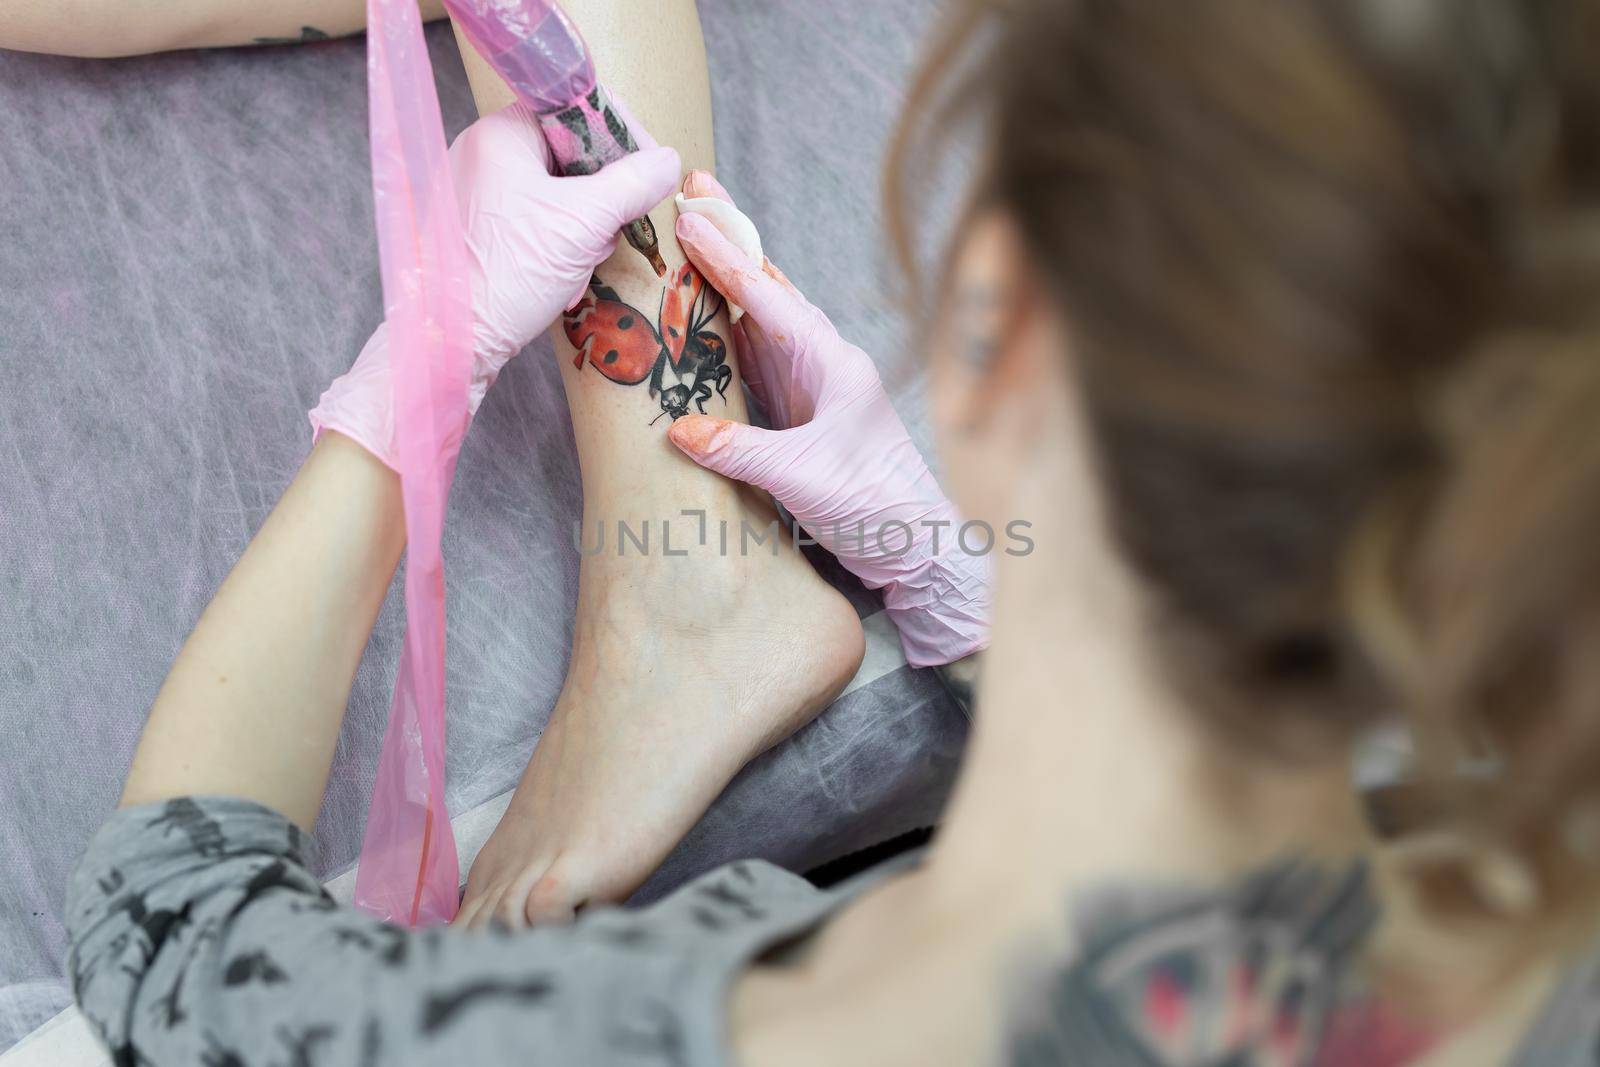 Needle tattoo machines inject a red ink into the skin of a girl. Close-up of the process of applying the tattoo on the skin. by StudioPeace